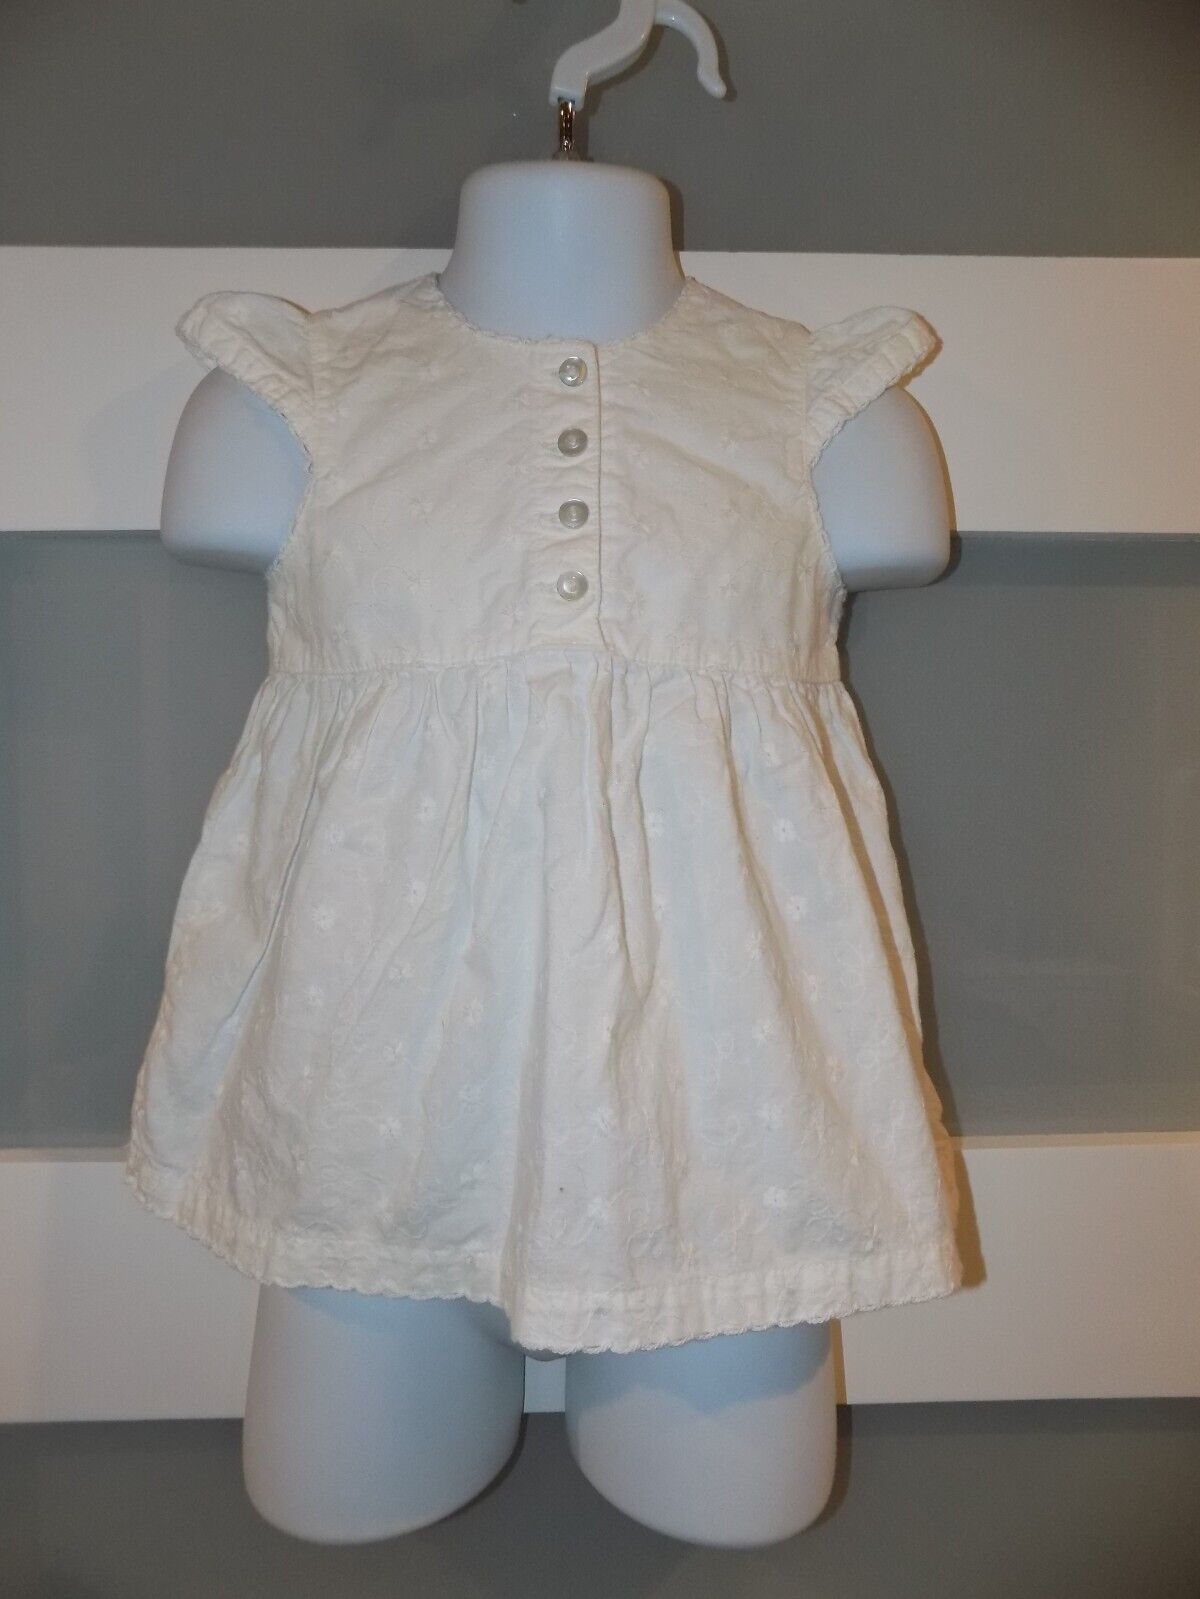 H&M White Cotton White Embroidered Dress W/Bottoms Size 2/4 Months Infant - $18.25